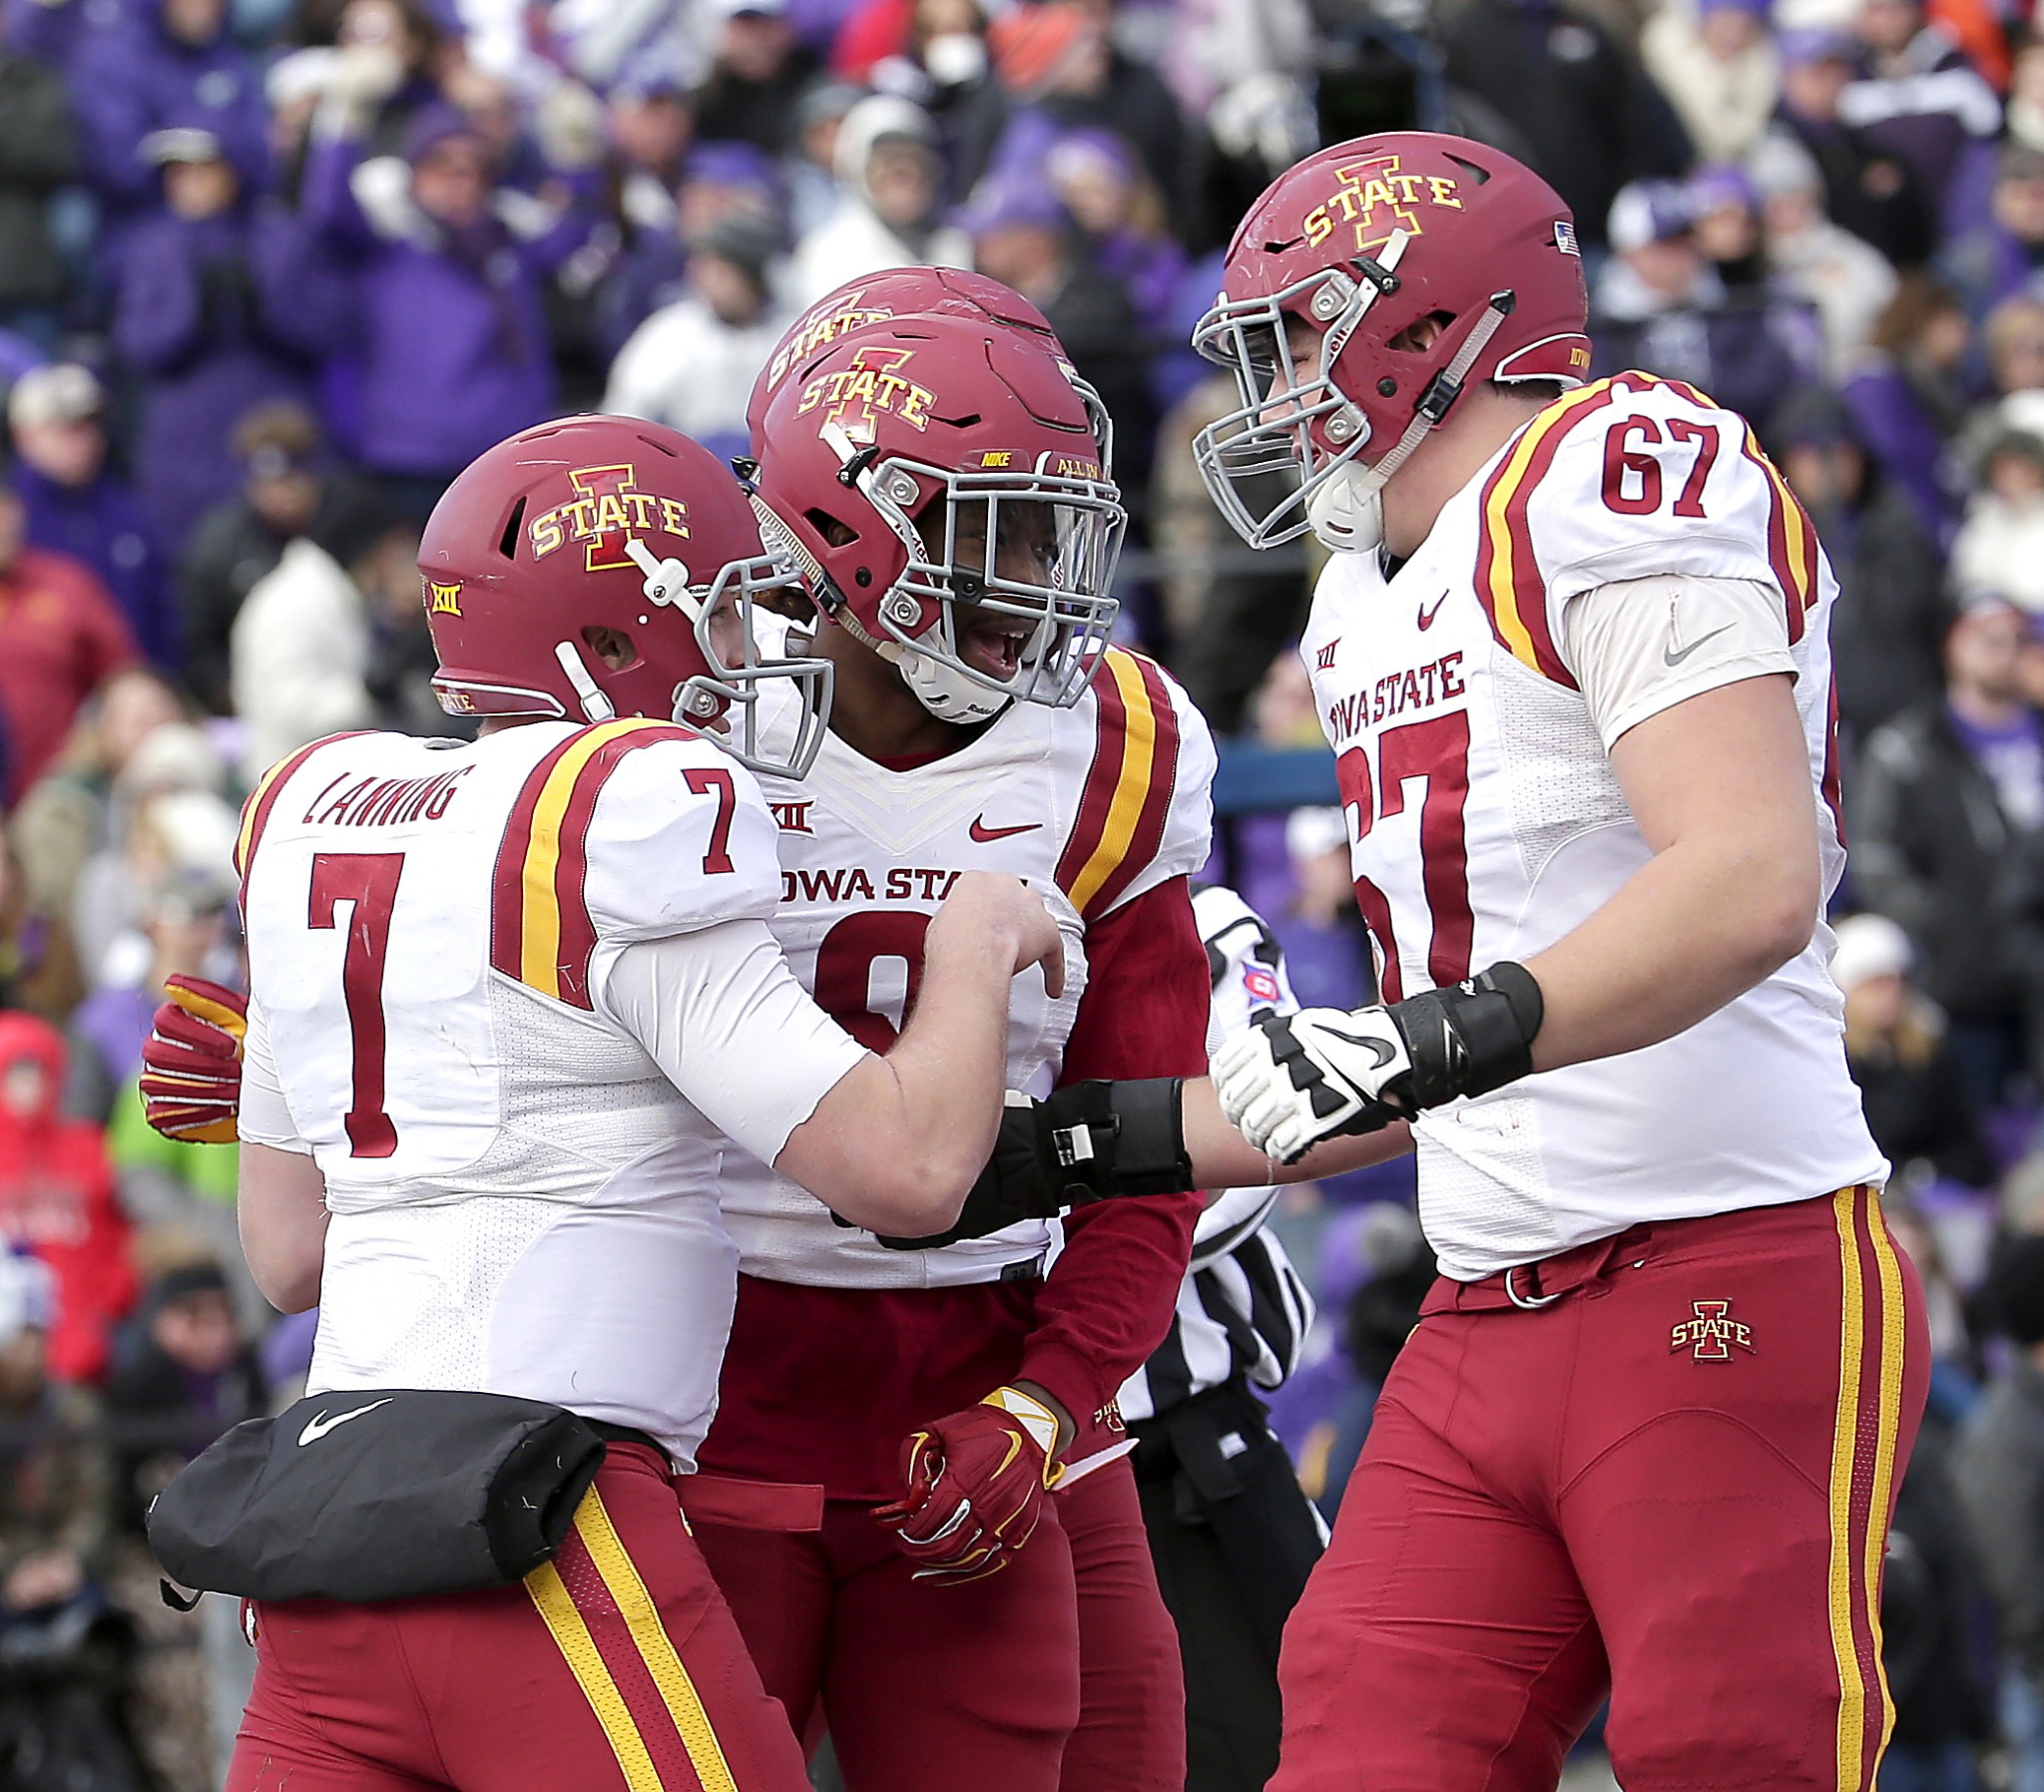 Iowa State QB Joel Lanning (7) celebrates with wide receiver Quenton Bundrage, center, and offensive lineman Jake Campos (67). (AP Photo/Charlie Riedel)